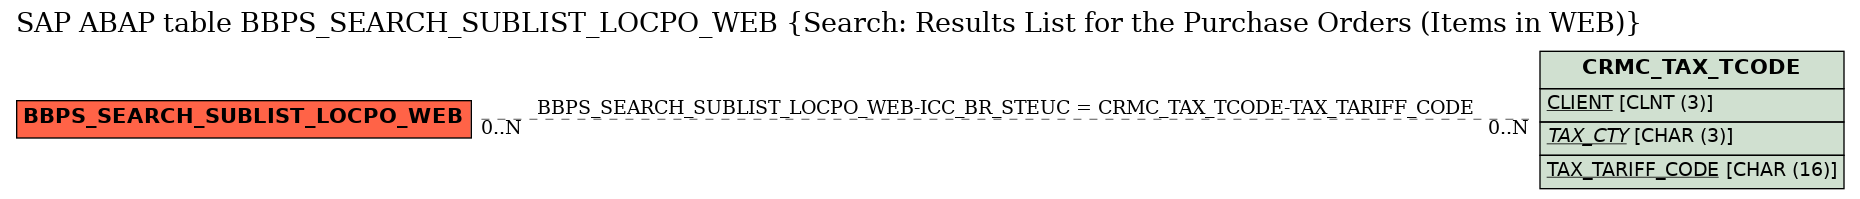 E-R Diagram for table BBPS_SEARCH_SUBLIST_LOCPO_WEB (Search: Results List for the Purchase Orders (Items in WEB))